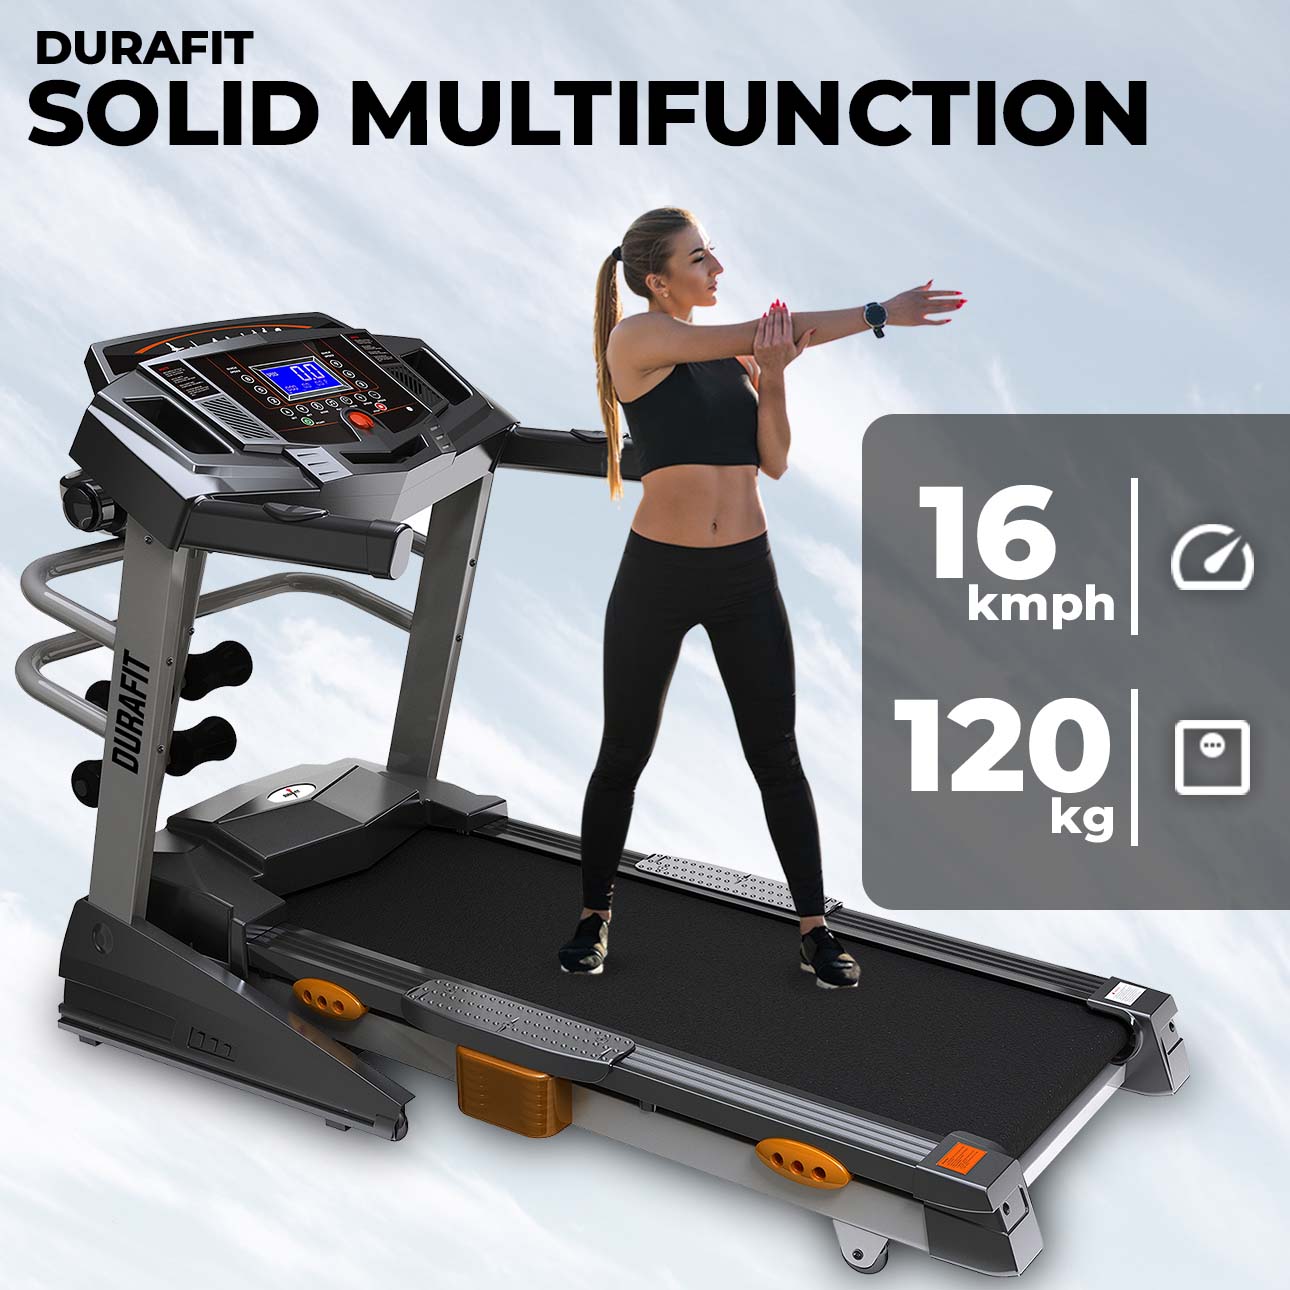 Durafit Solid Multifunction Treadmill with 120KG Max User Weight